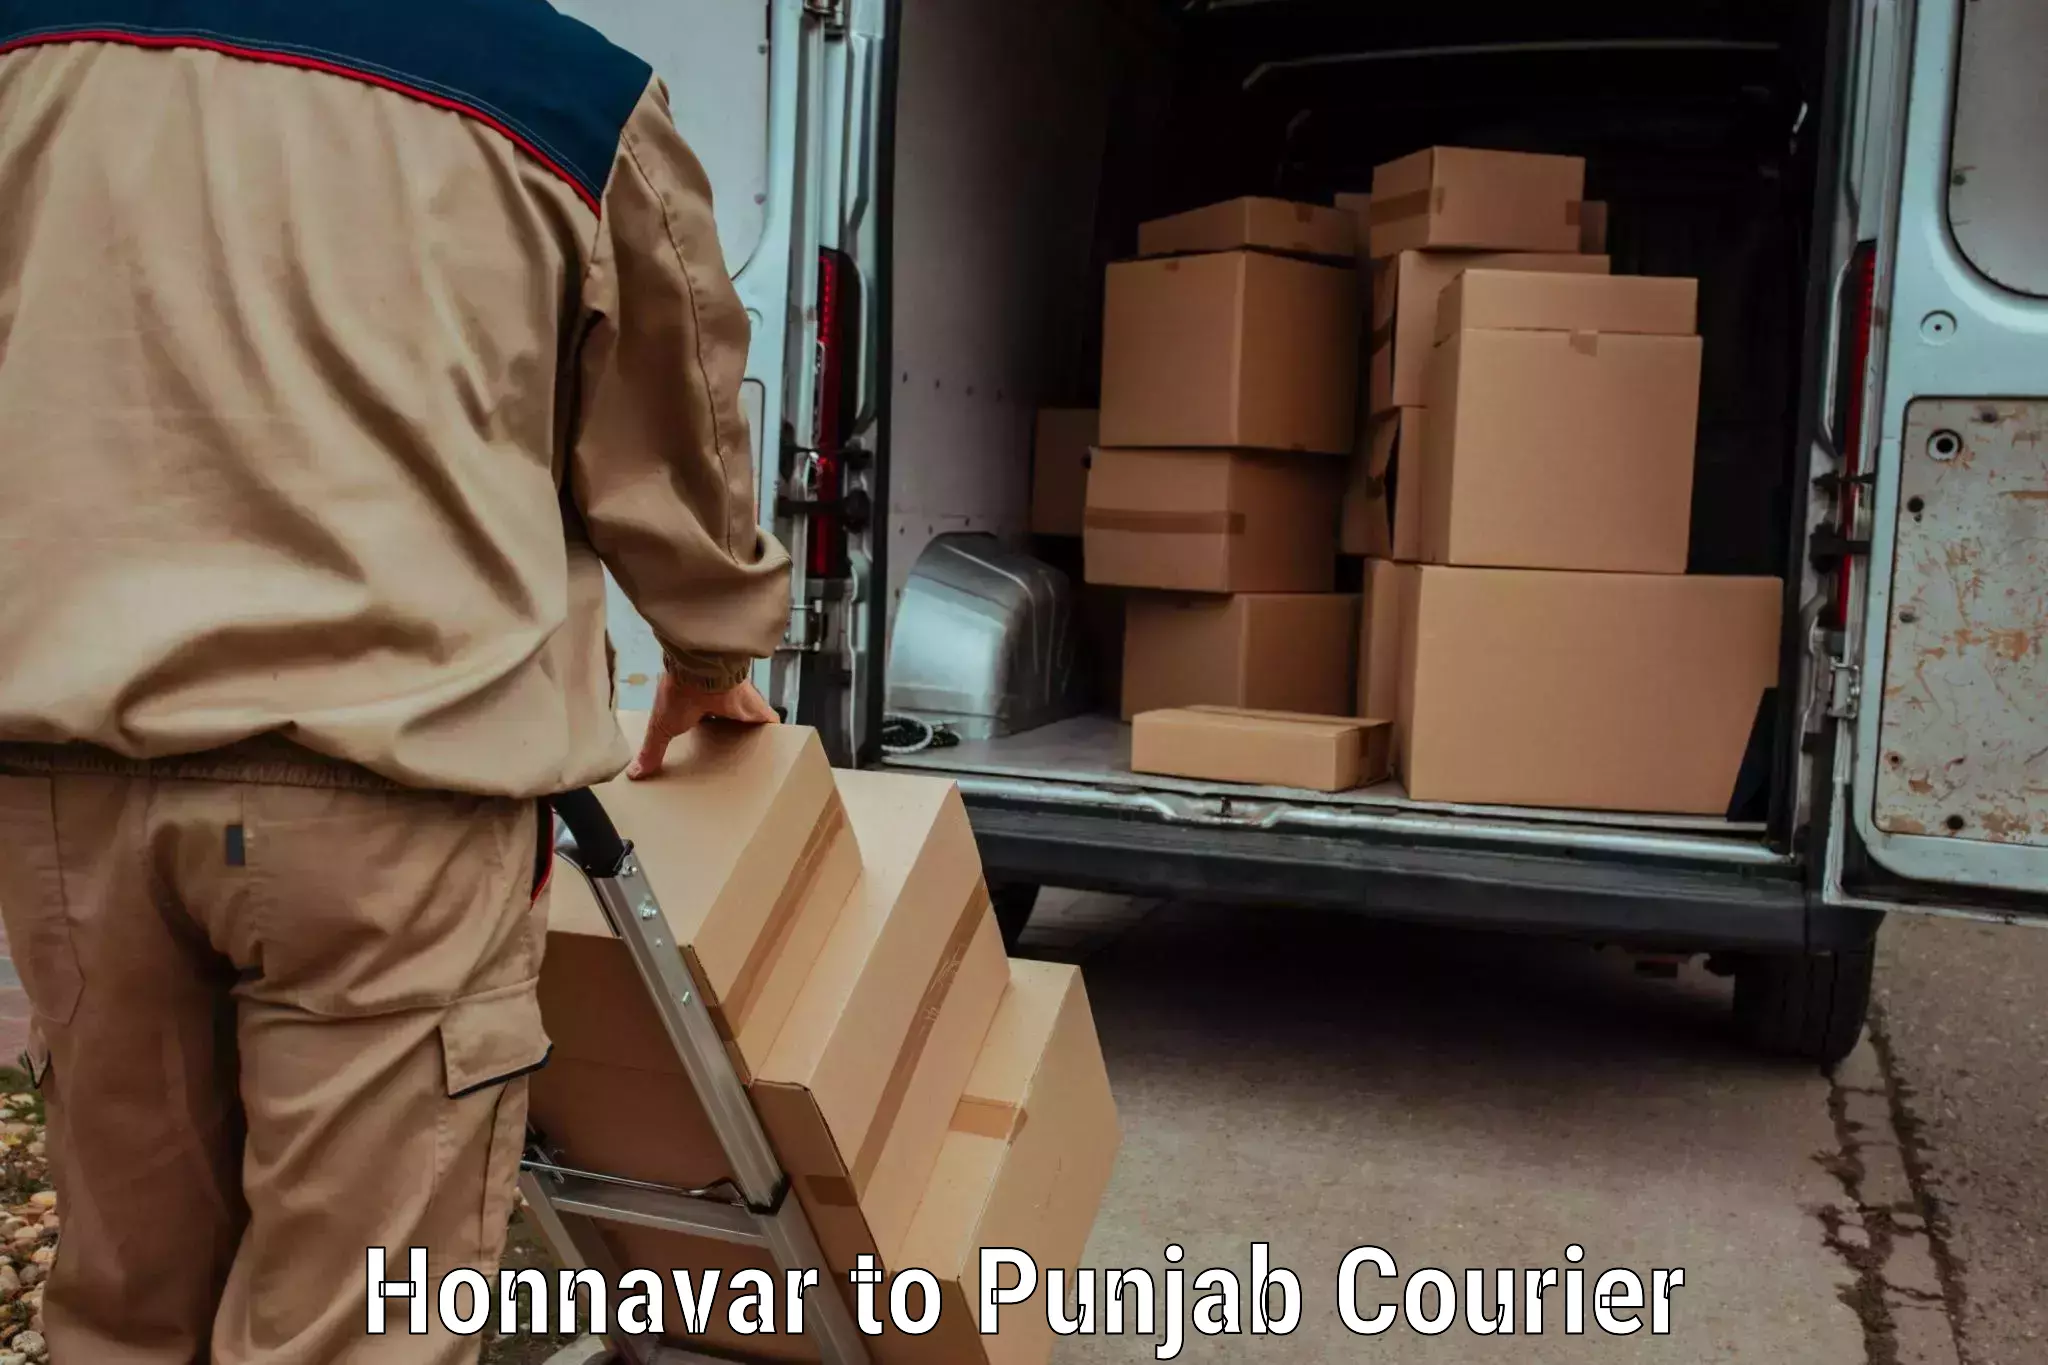 Full-service courier options Honnavar to Sirhind Fatehgarh